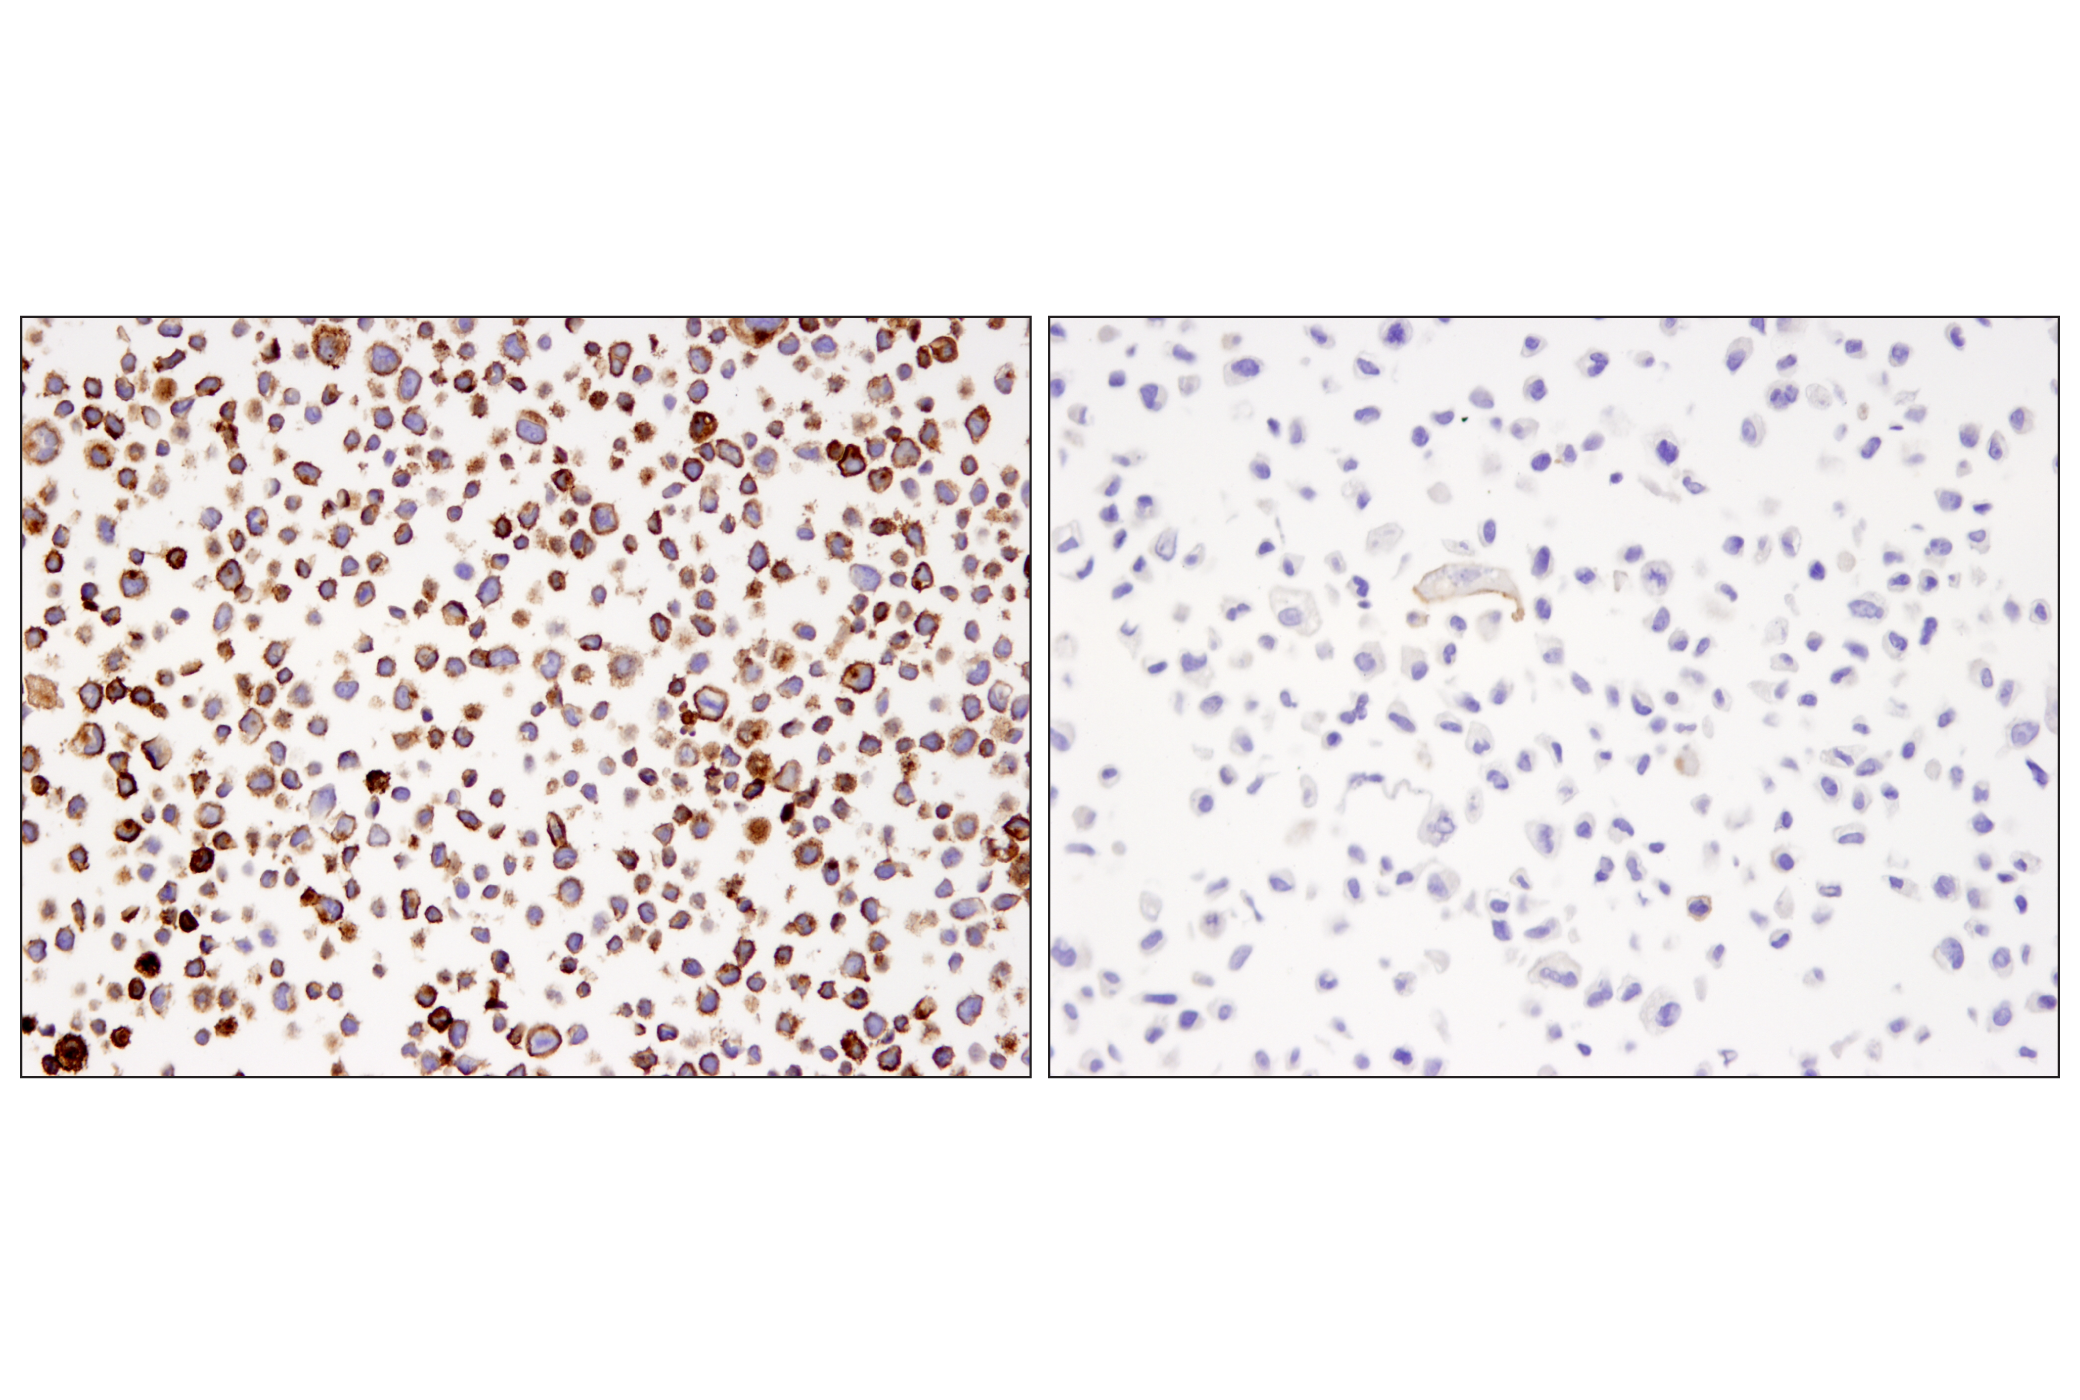 Immunohistochemistry Image 3: PD-L1 (405.9A11) Mouse mAb